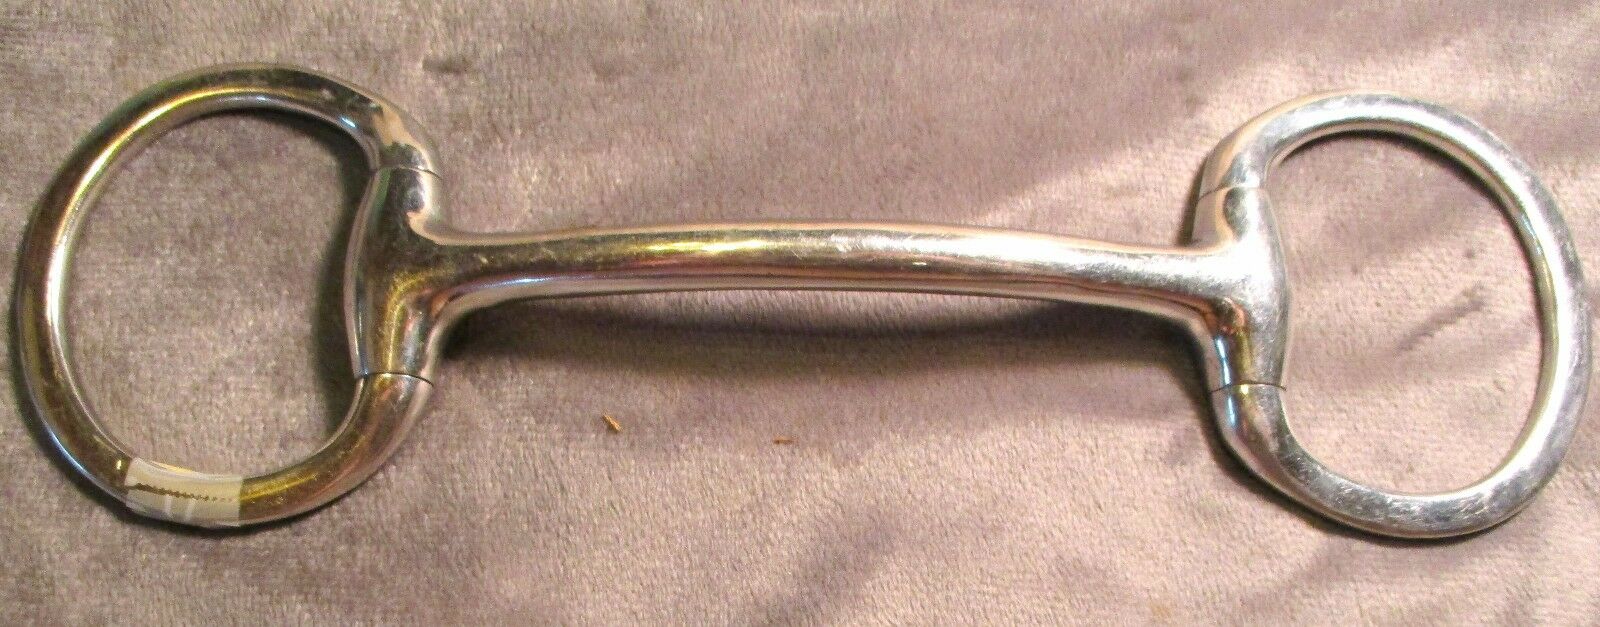 Quality Used Stainless D Ring Horse Bit With 5" Arched Mouth Joints Tight